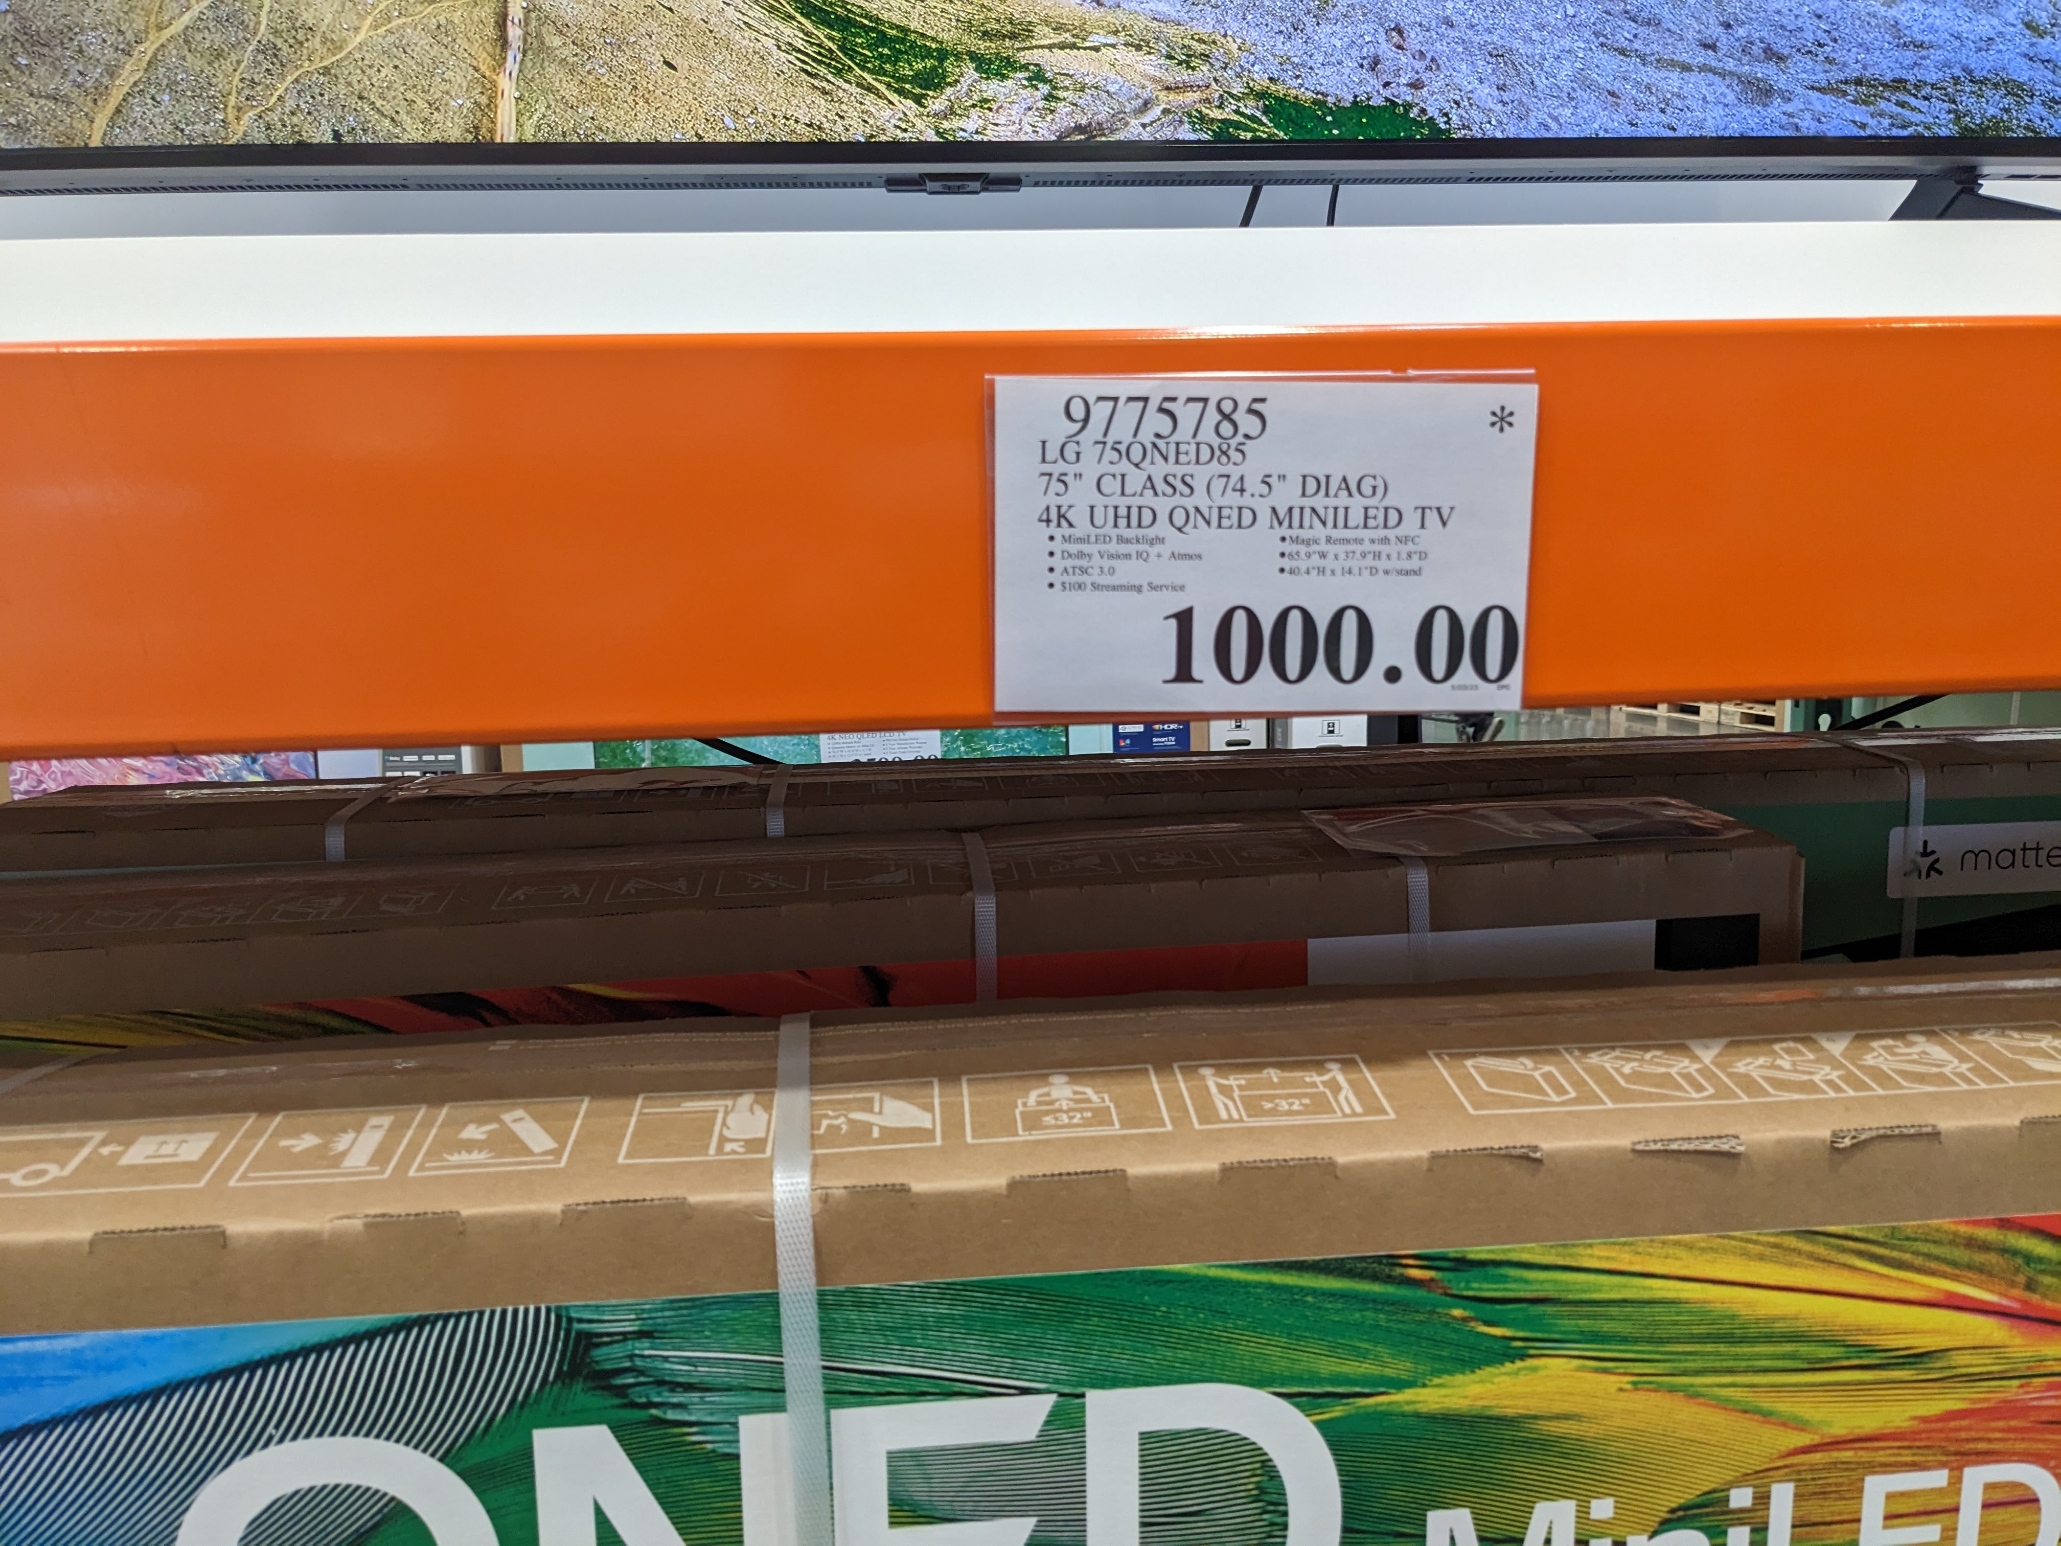 YMMV I found 75 inches LG QNED85 for $1000 in Costco ($1999 online price )